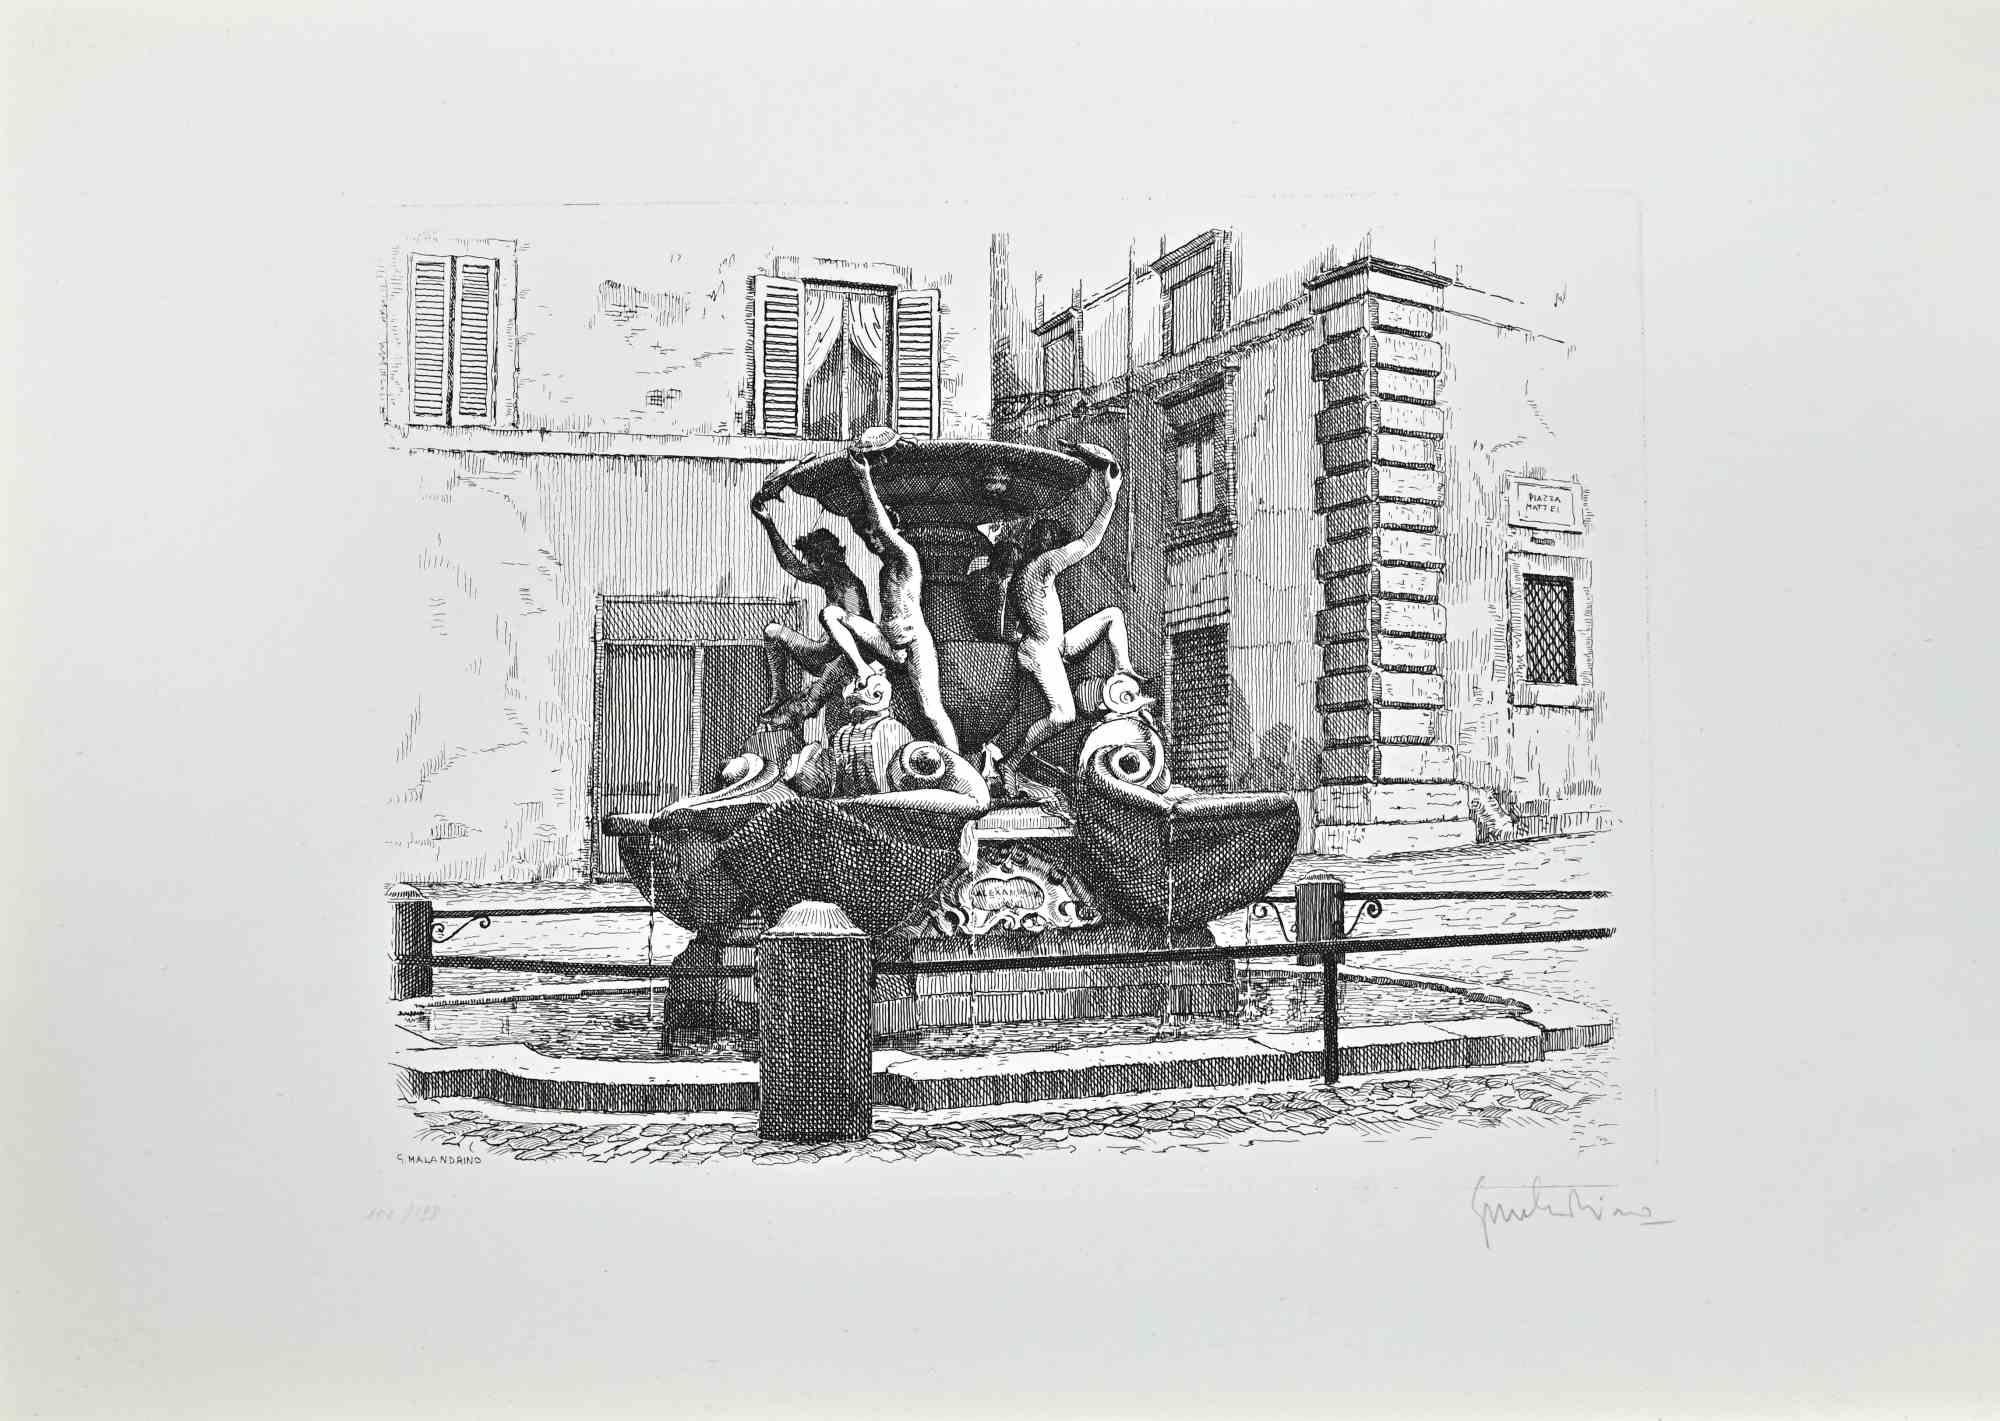 Turtle Fountain - Rome is an artwork realized by Giuseppe Malandrino.

Original print in etching technique.

Hand-signed by the artist in pencil on the lower right corner.

Numbered n. 102/199 edition on the lower left corner.

Good conditions.